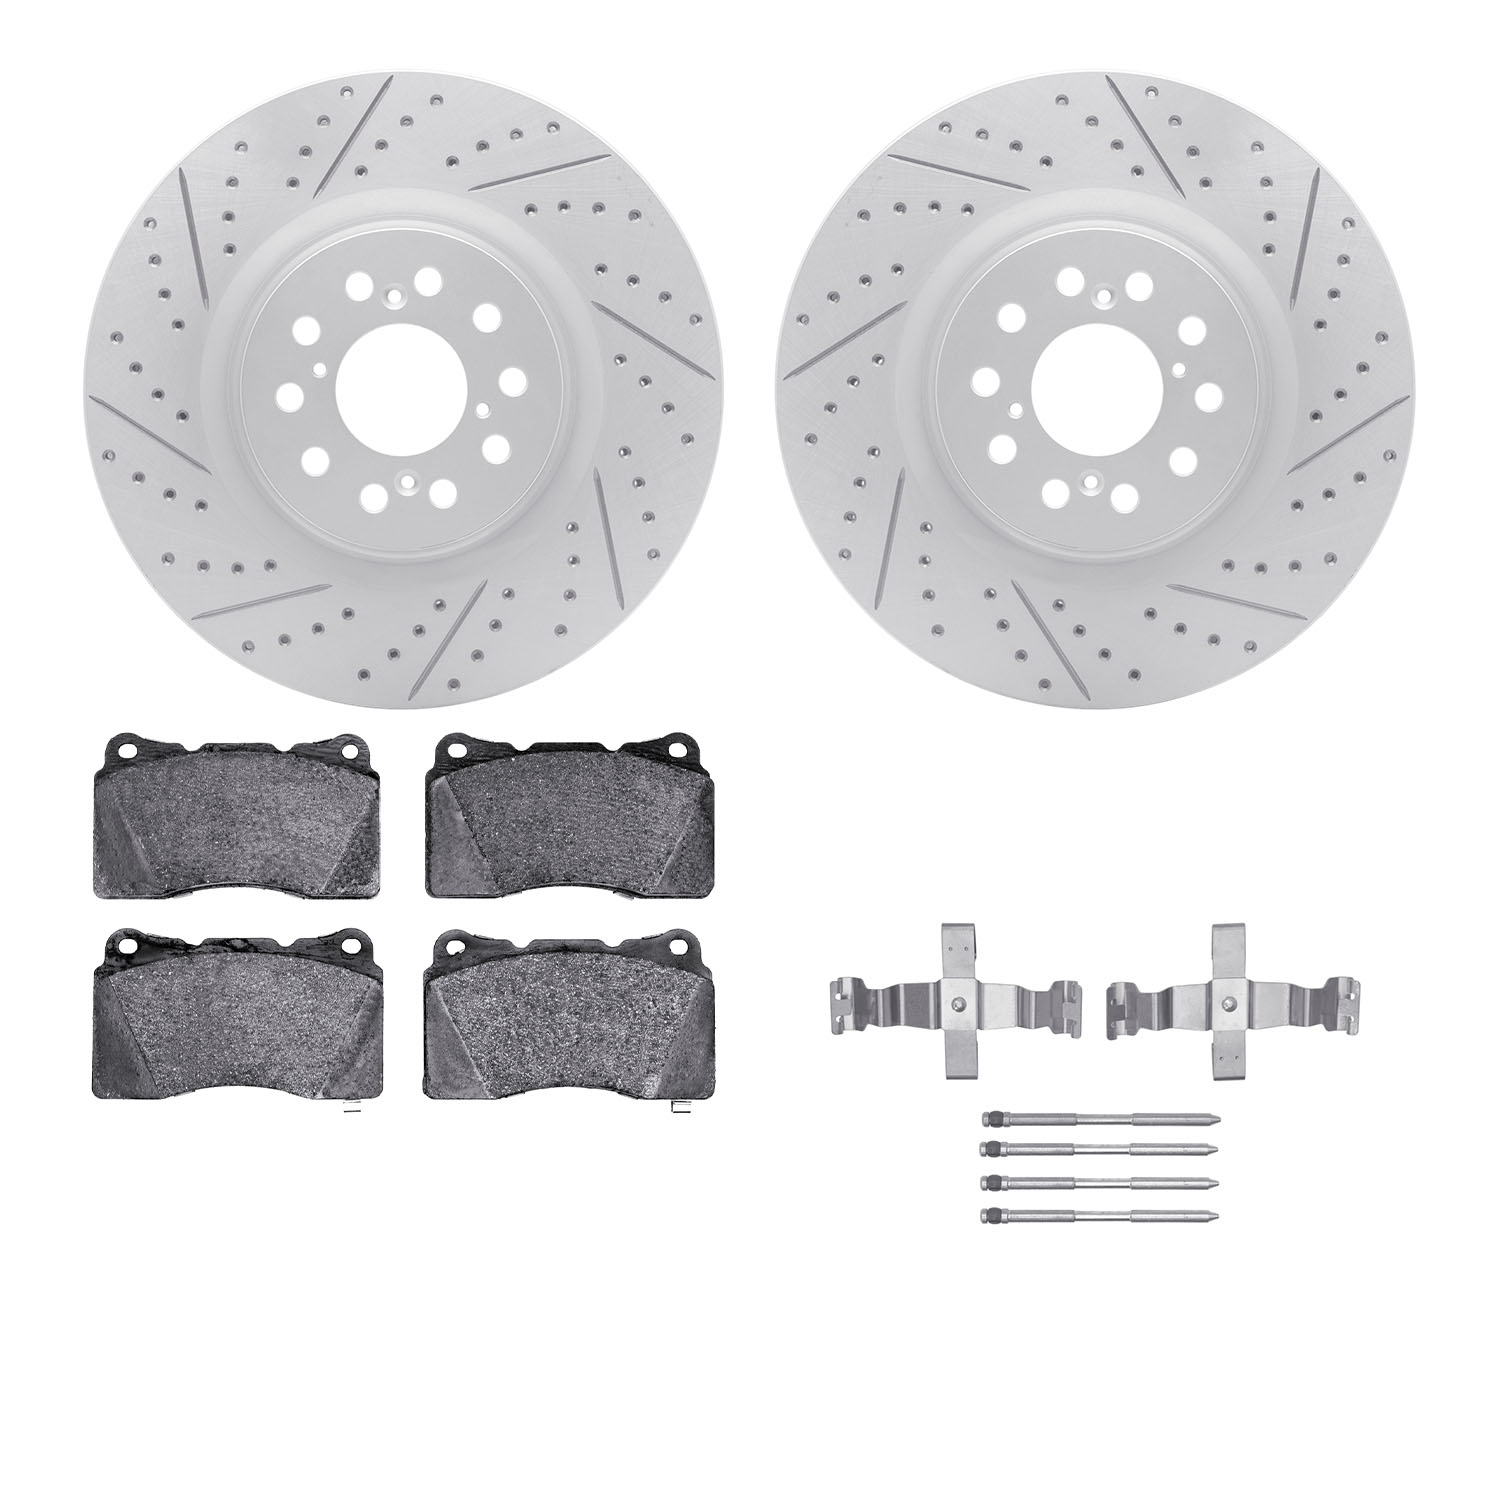 2512-59340 Geoperformance Drilled/Slotted Rotors w/5000 Advanced Brake Pads Kit & Hardware, 2020-2021 Acura/Honda, Position: Fro